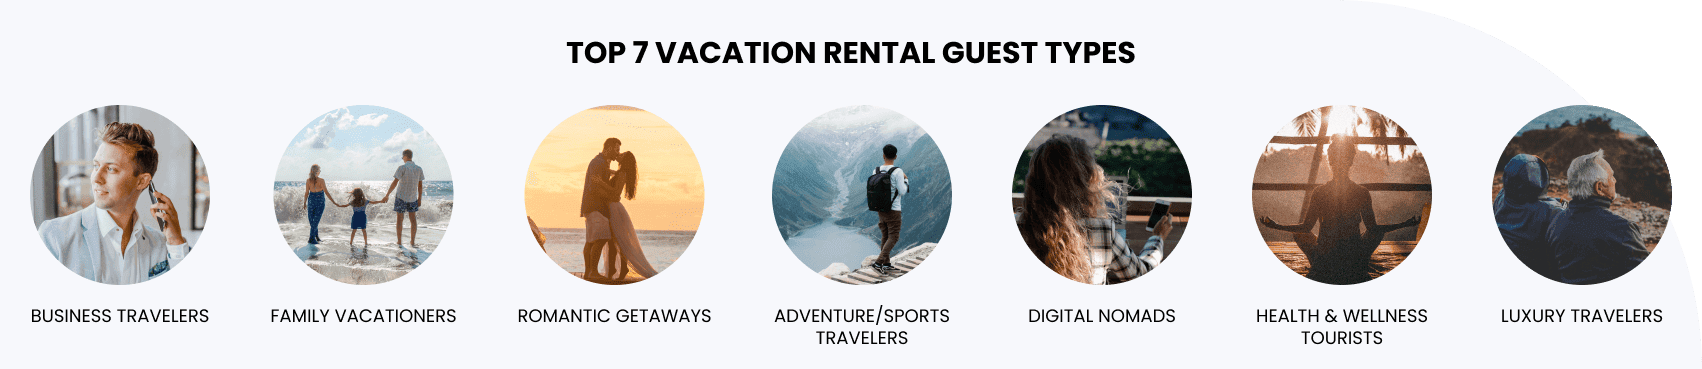 7 types of vacation rental guests